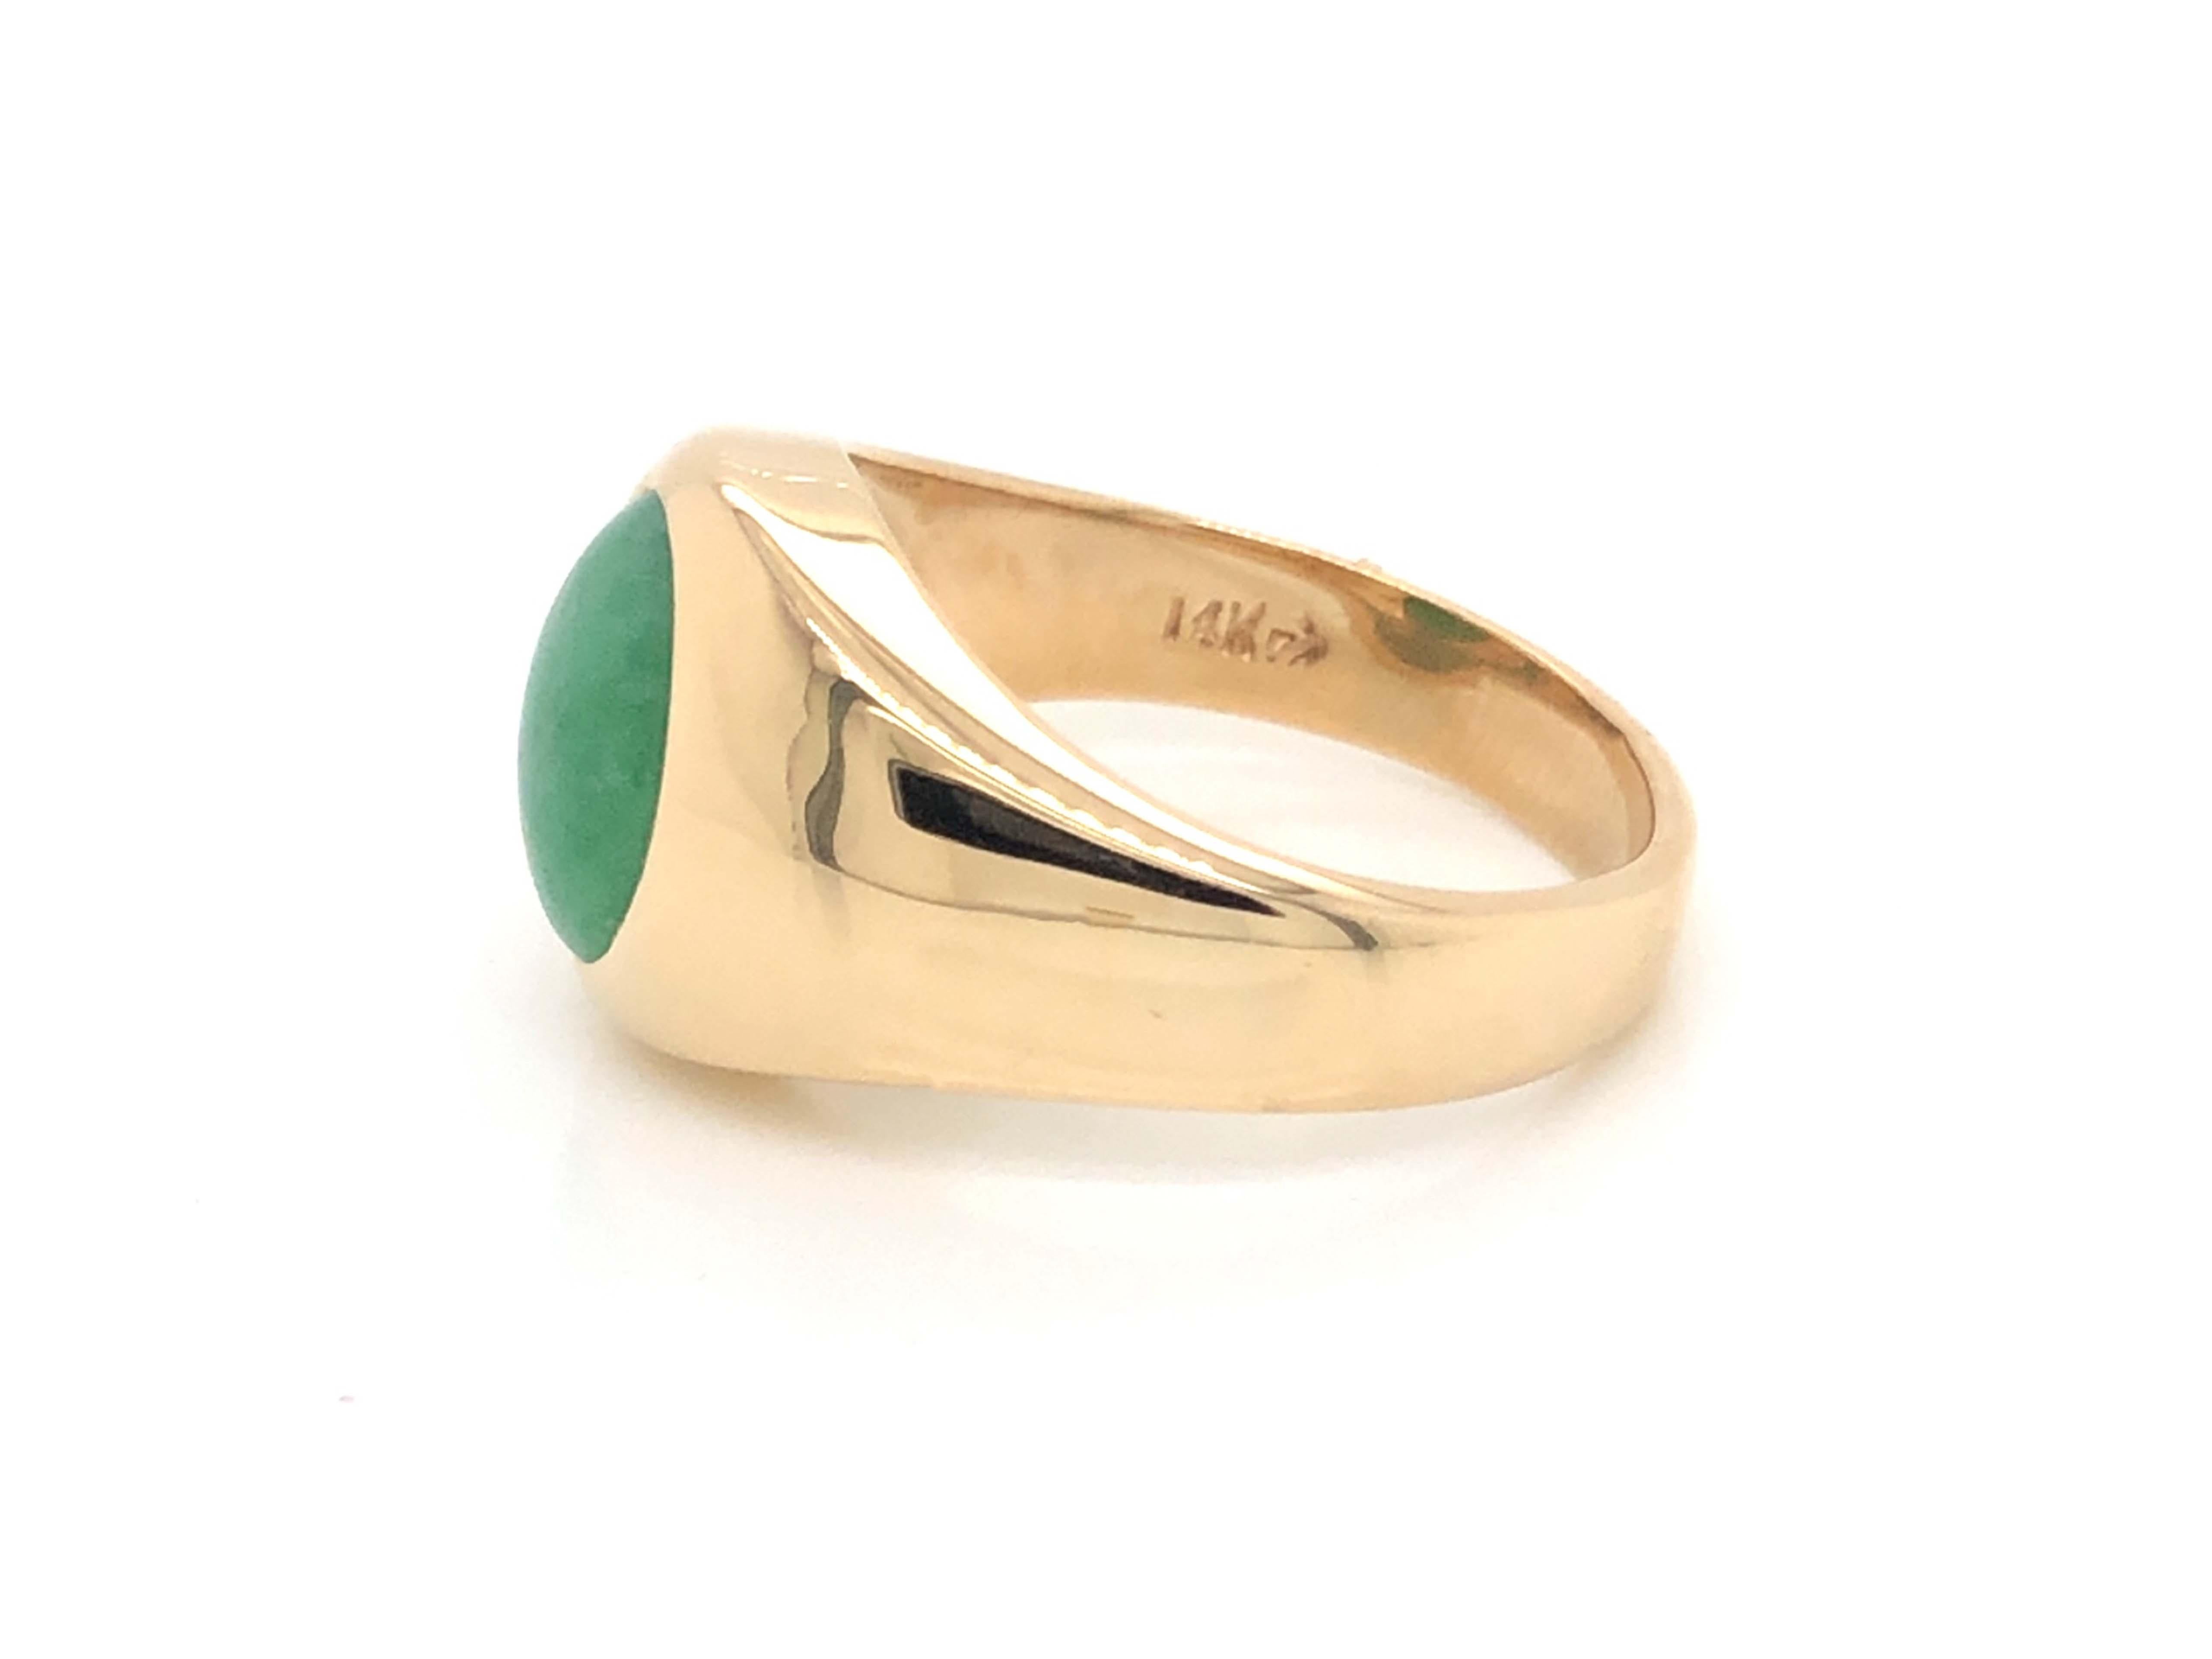 Women's Vintage Men's Oval Cabochon Green Jade Ring, 14k Yellow Gold